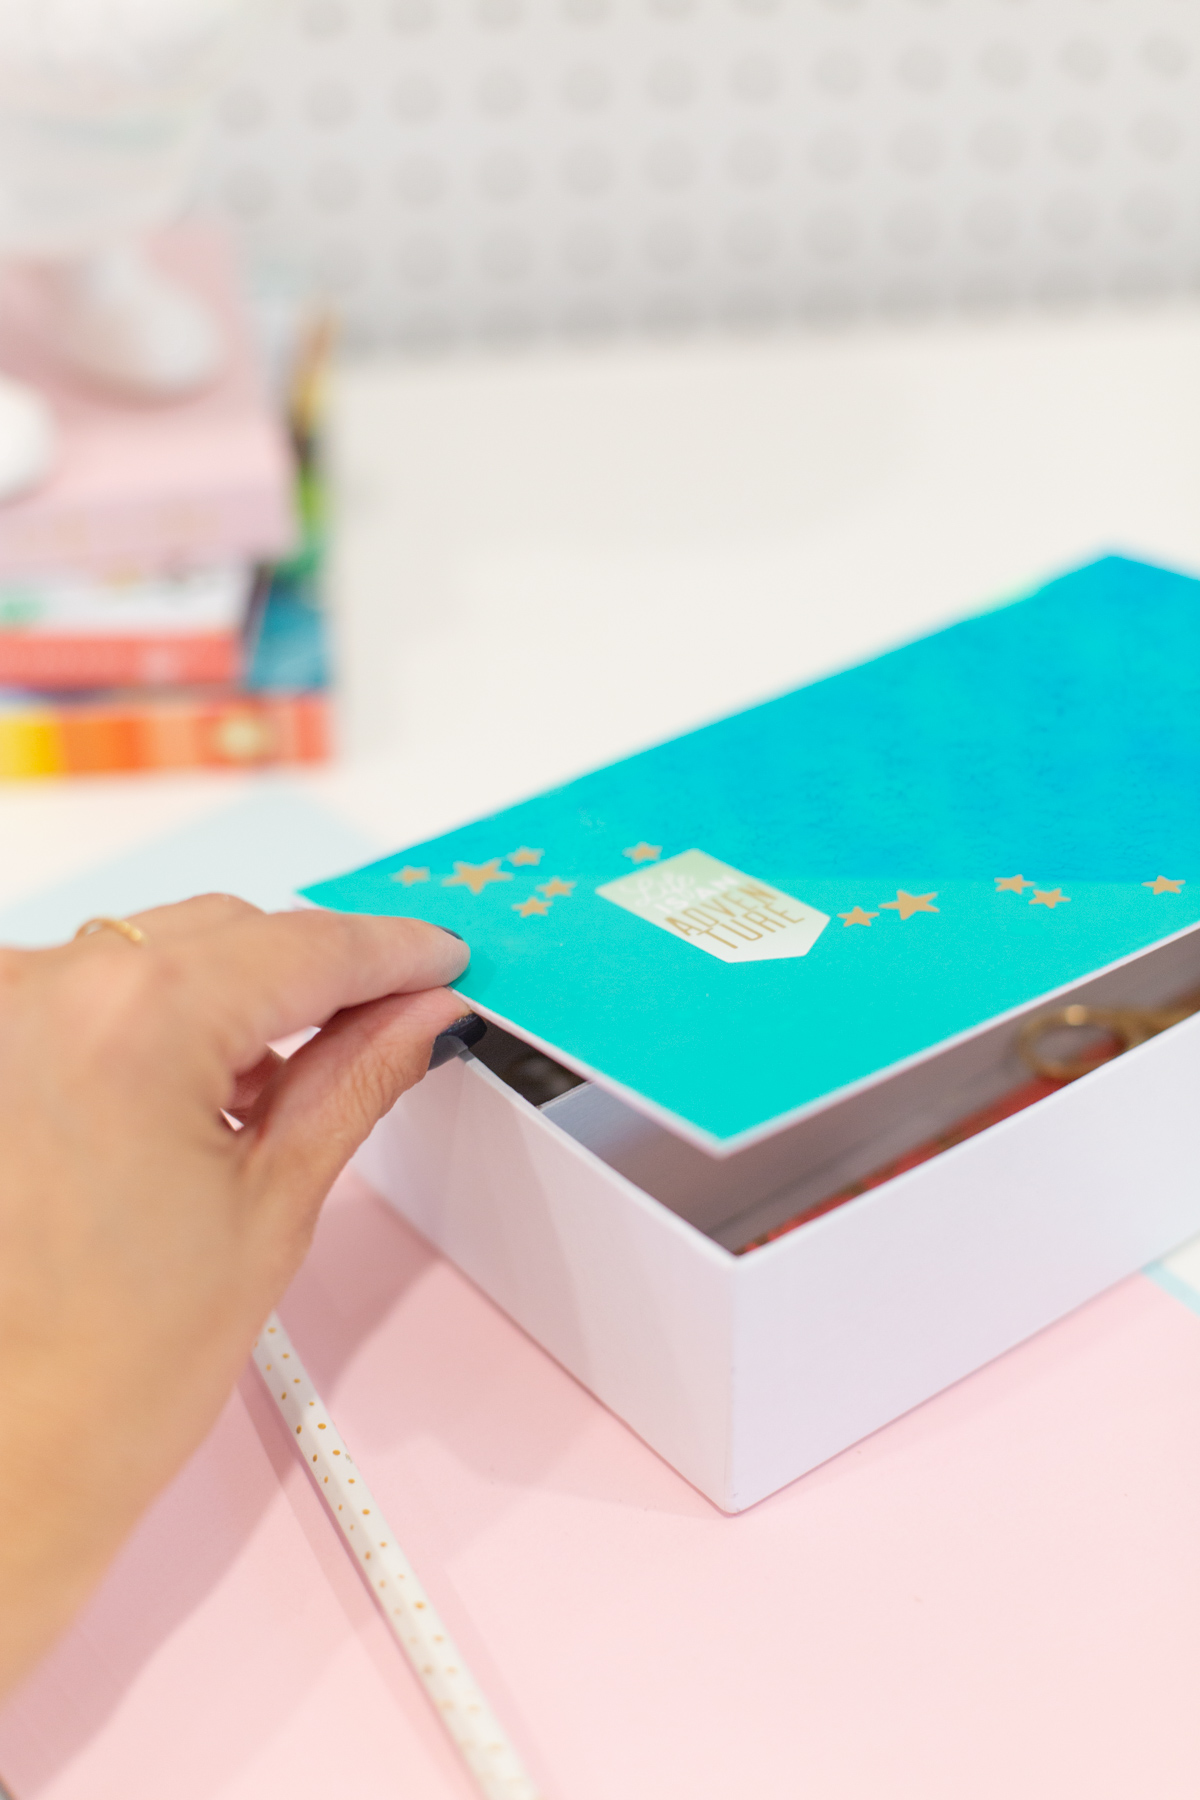 Hand opening decorated pencil box